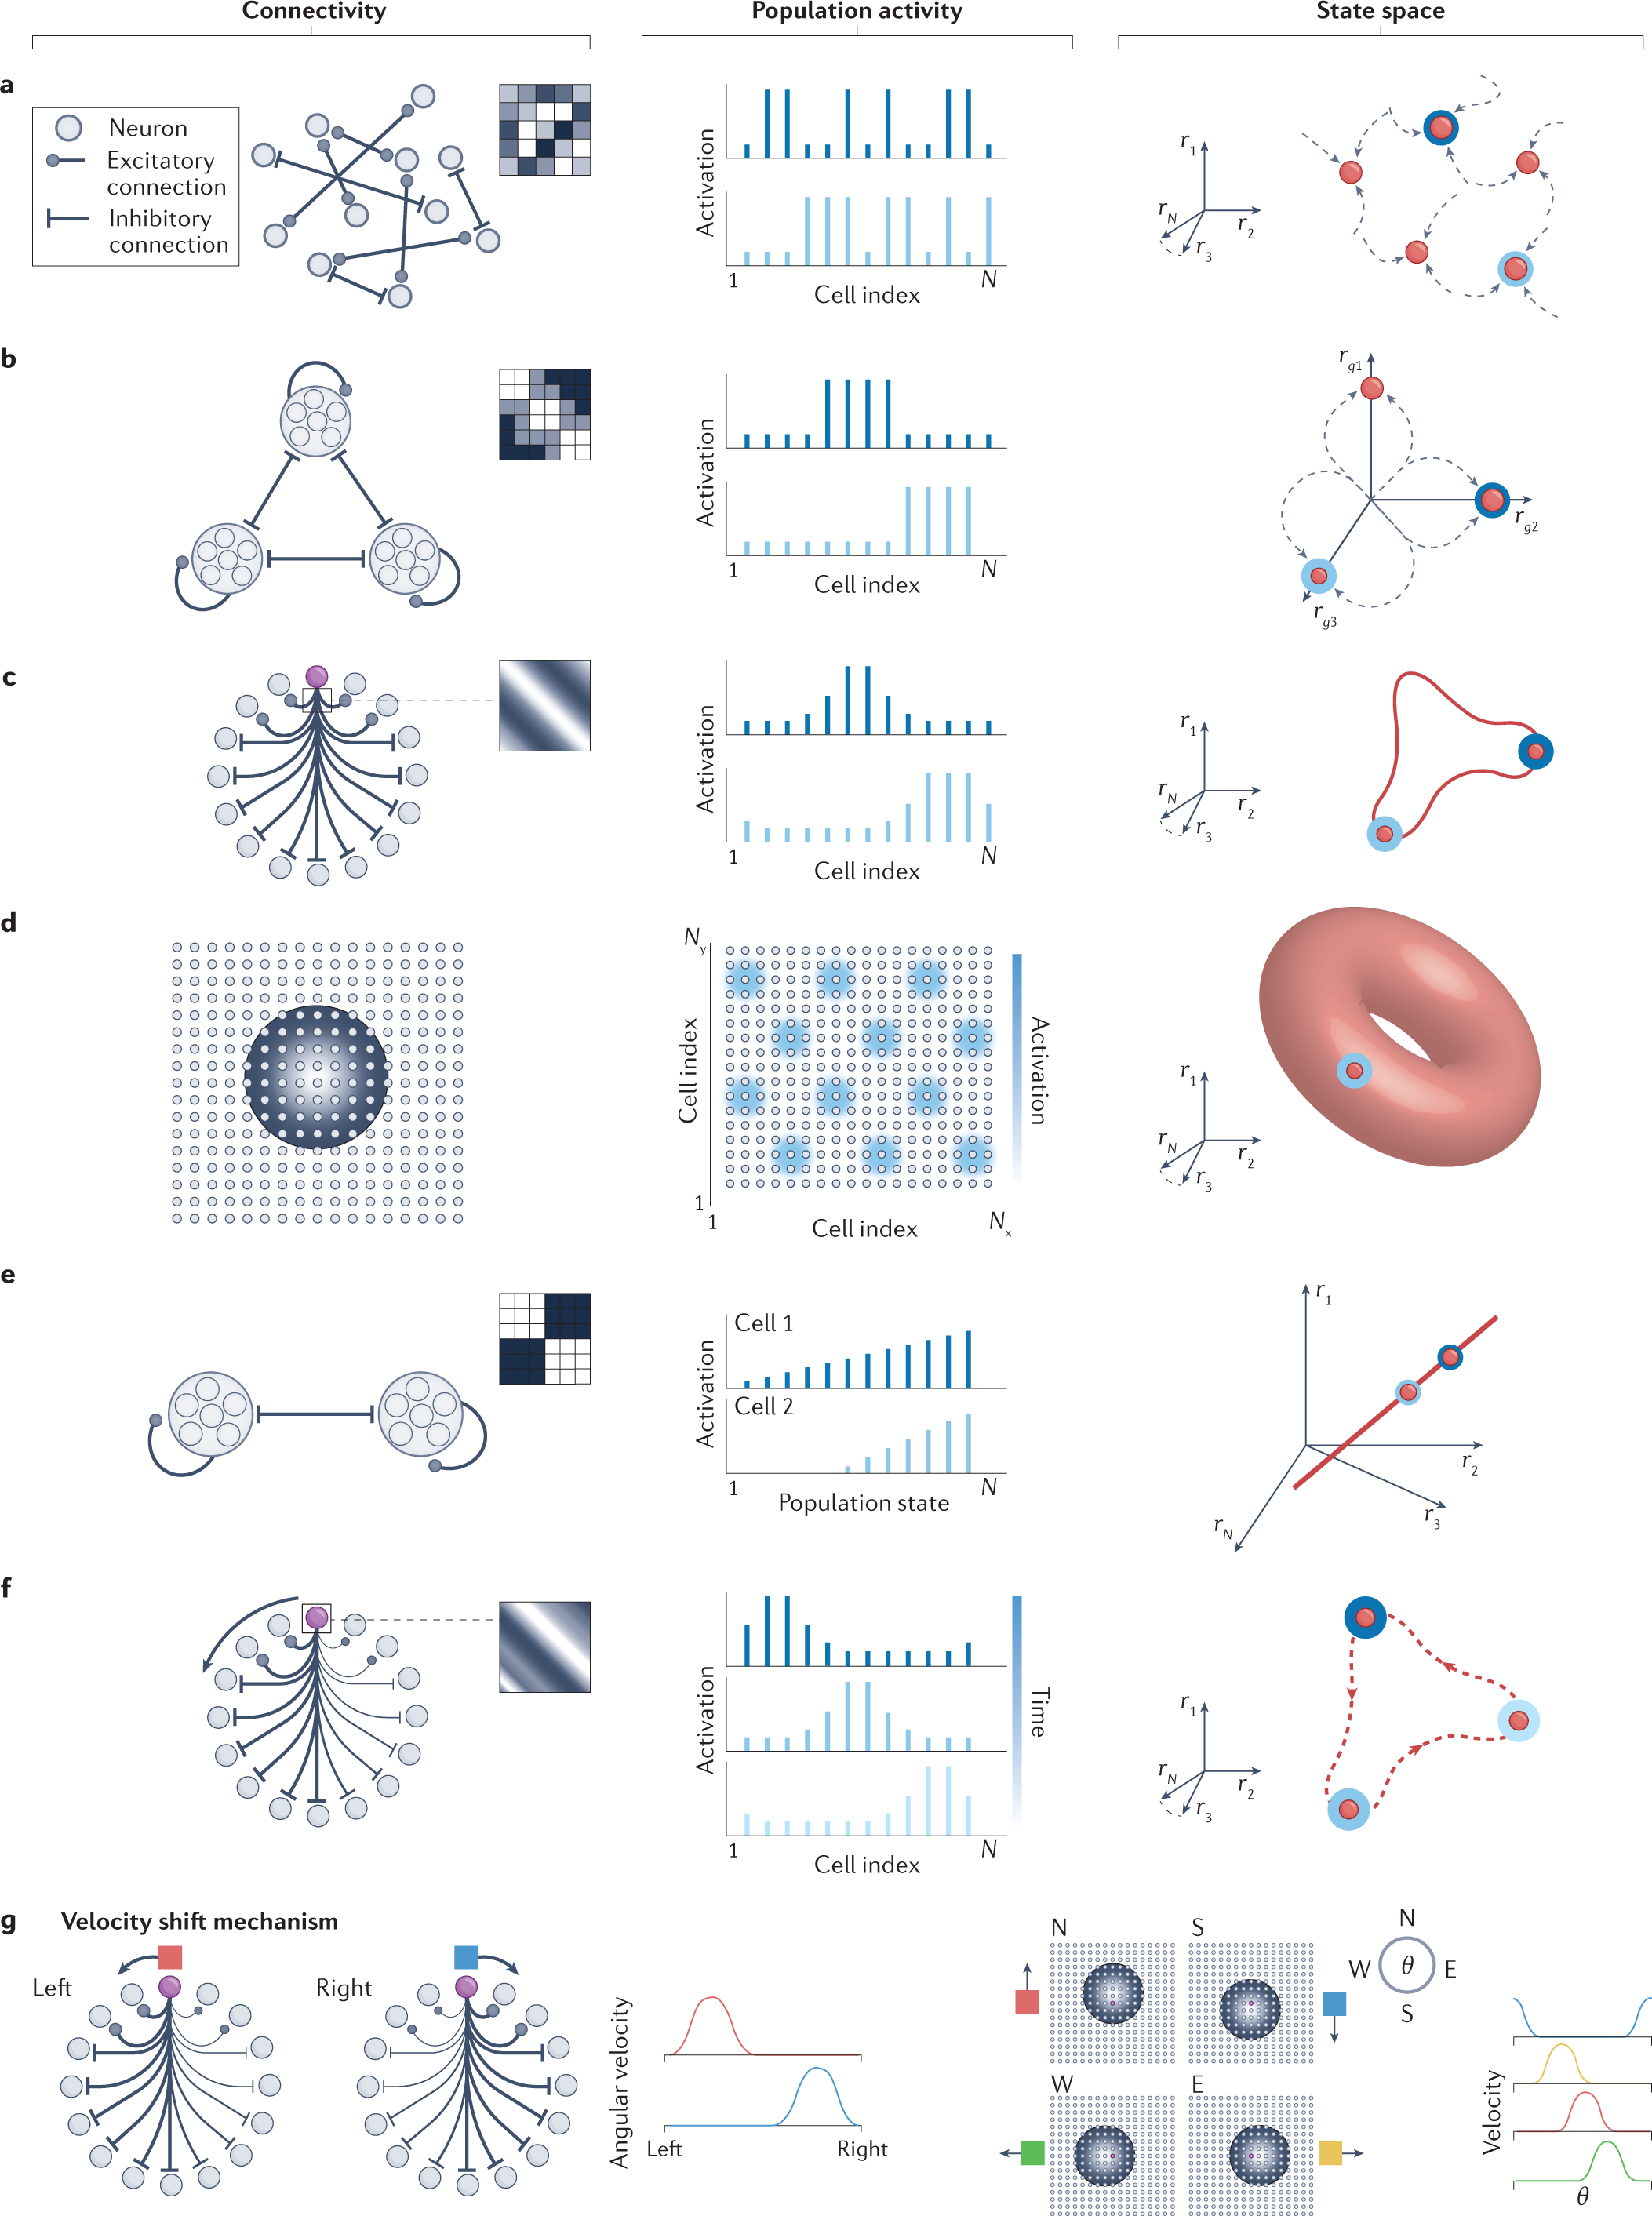 Attractor and integrator networks in the brain | Nature Reviews Neuroscience